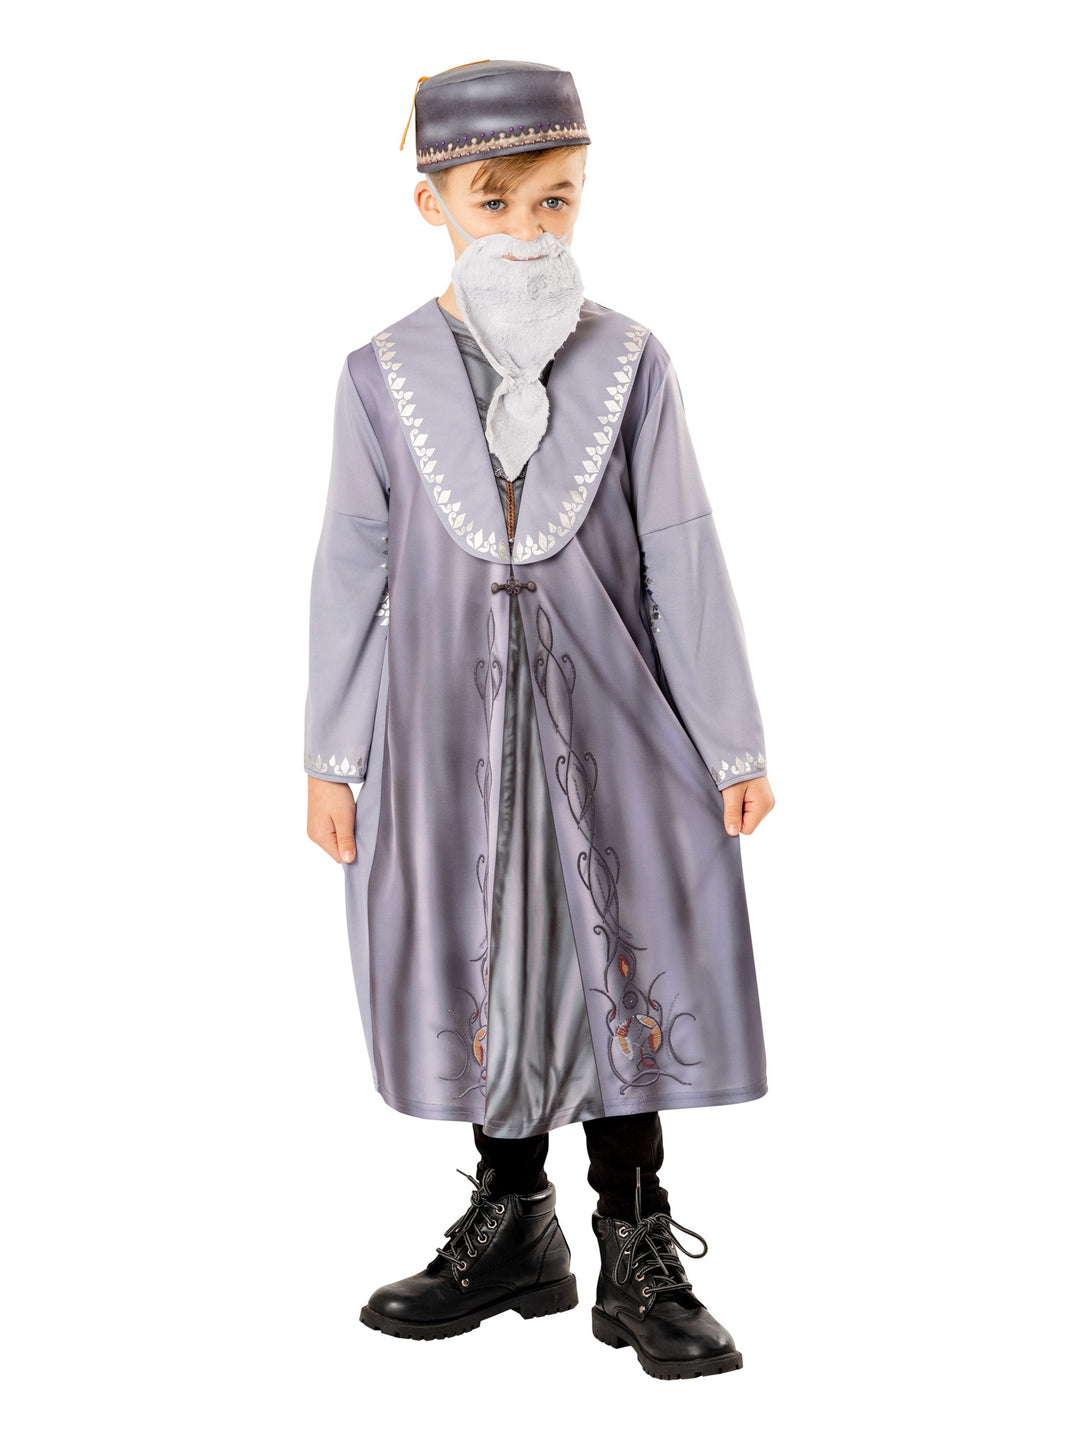 Boys Dumbledore Harry Potter Robe World Book Day Character Costume